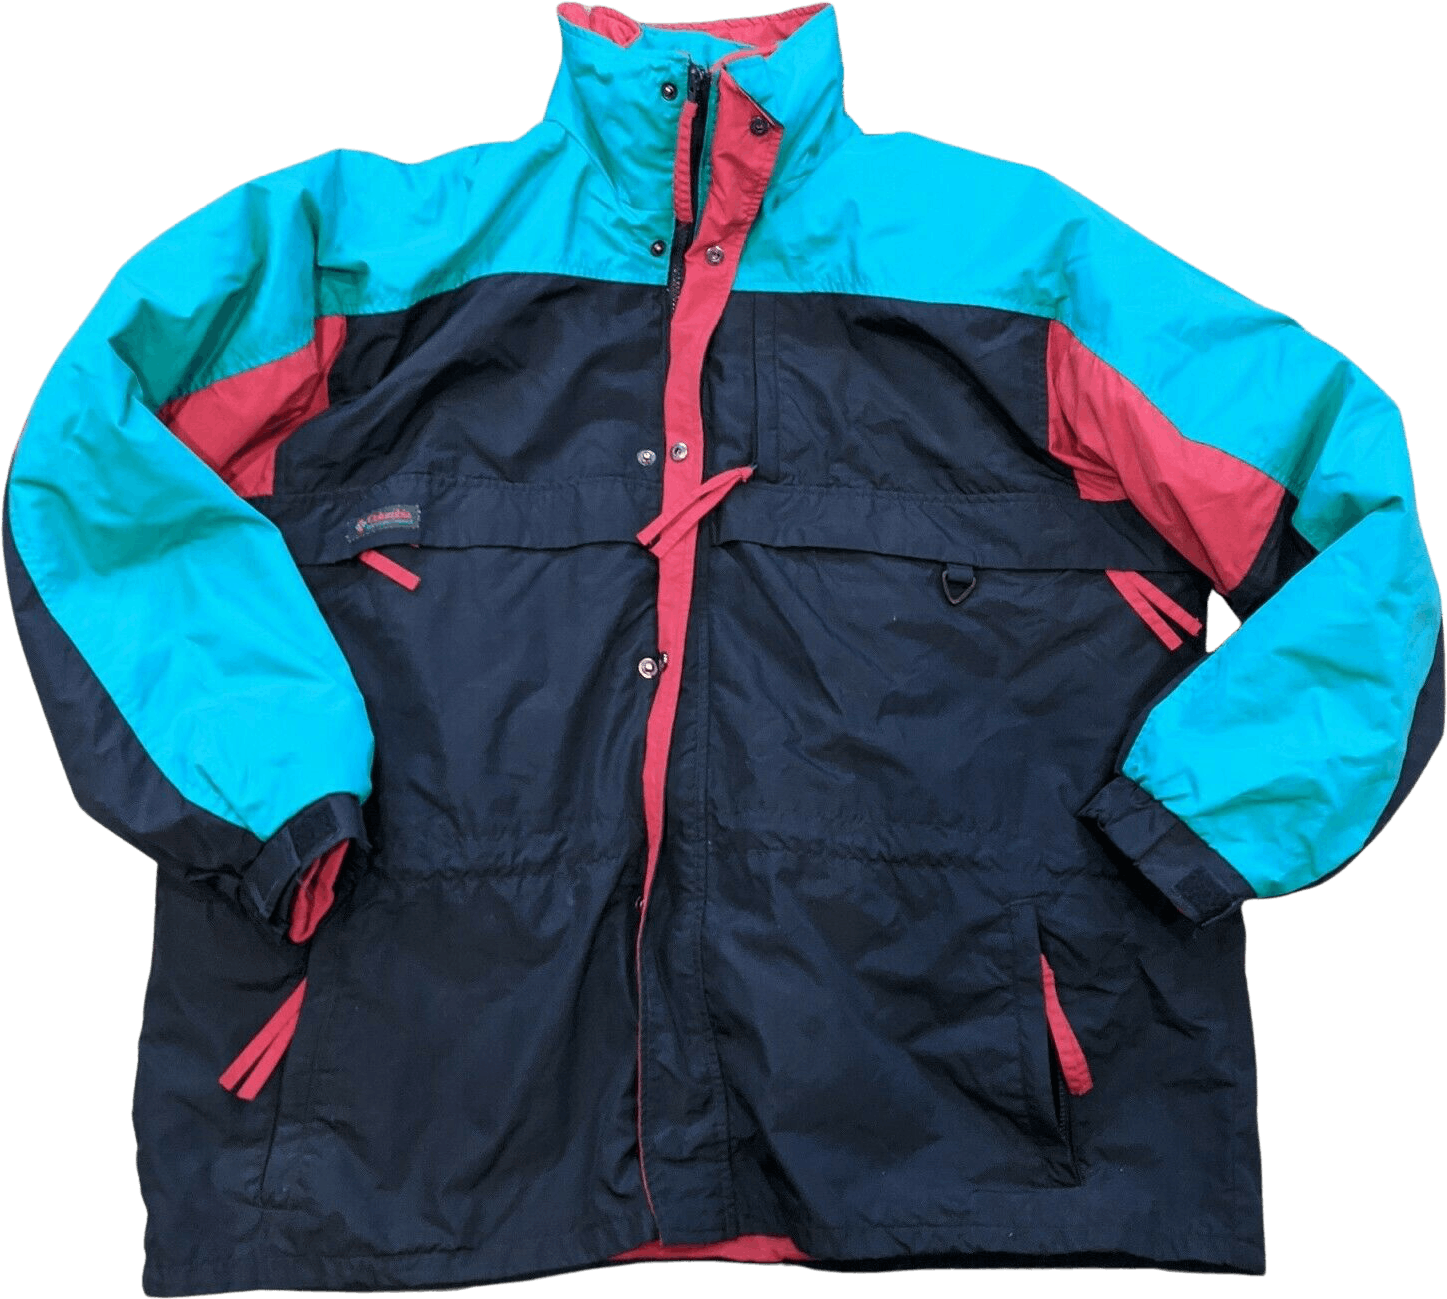 90's Gizmo Three In One Winter Jacket by Columbia